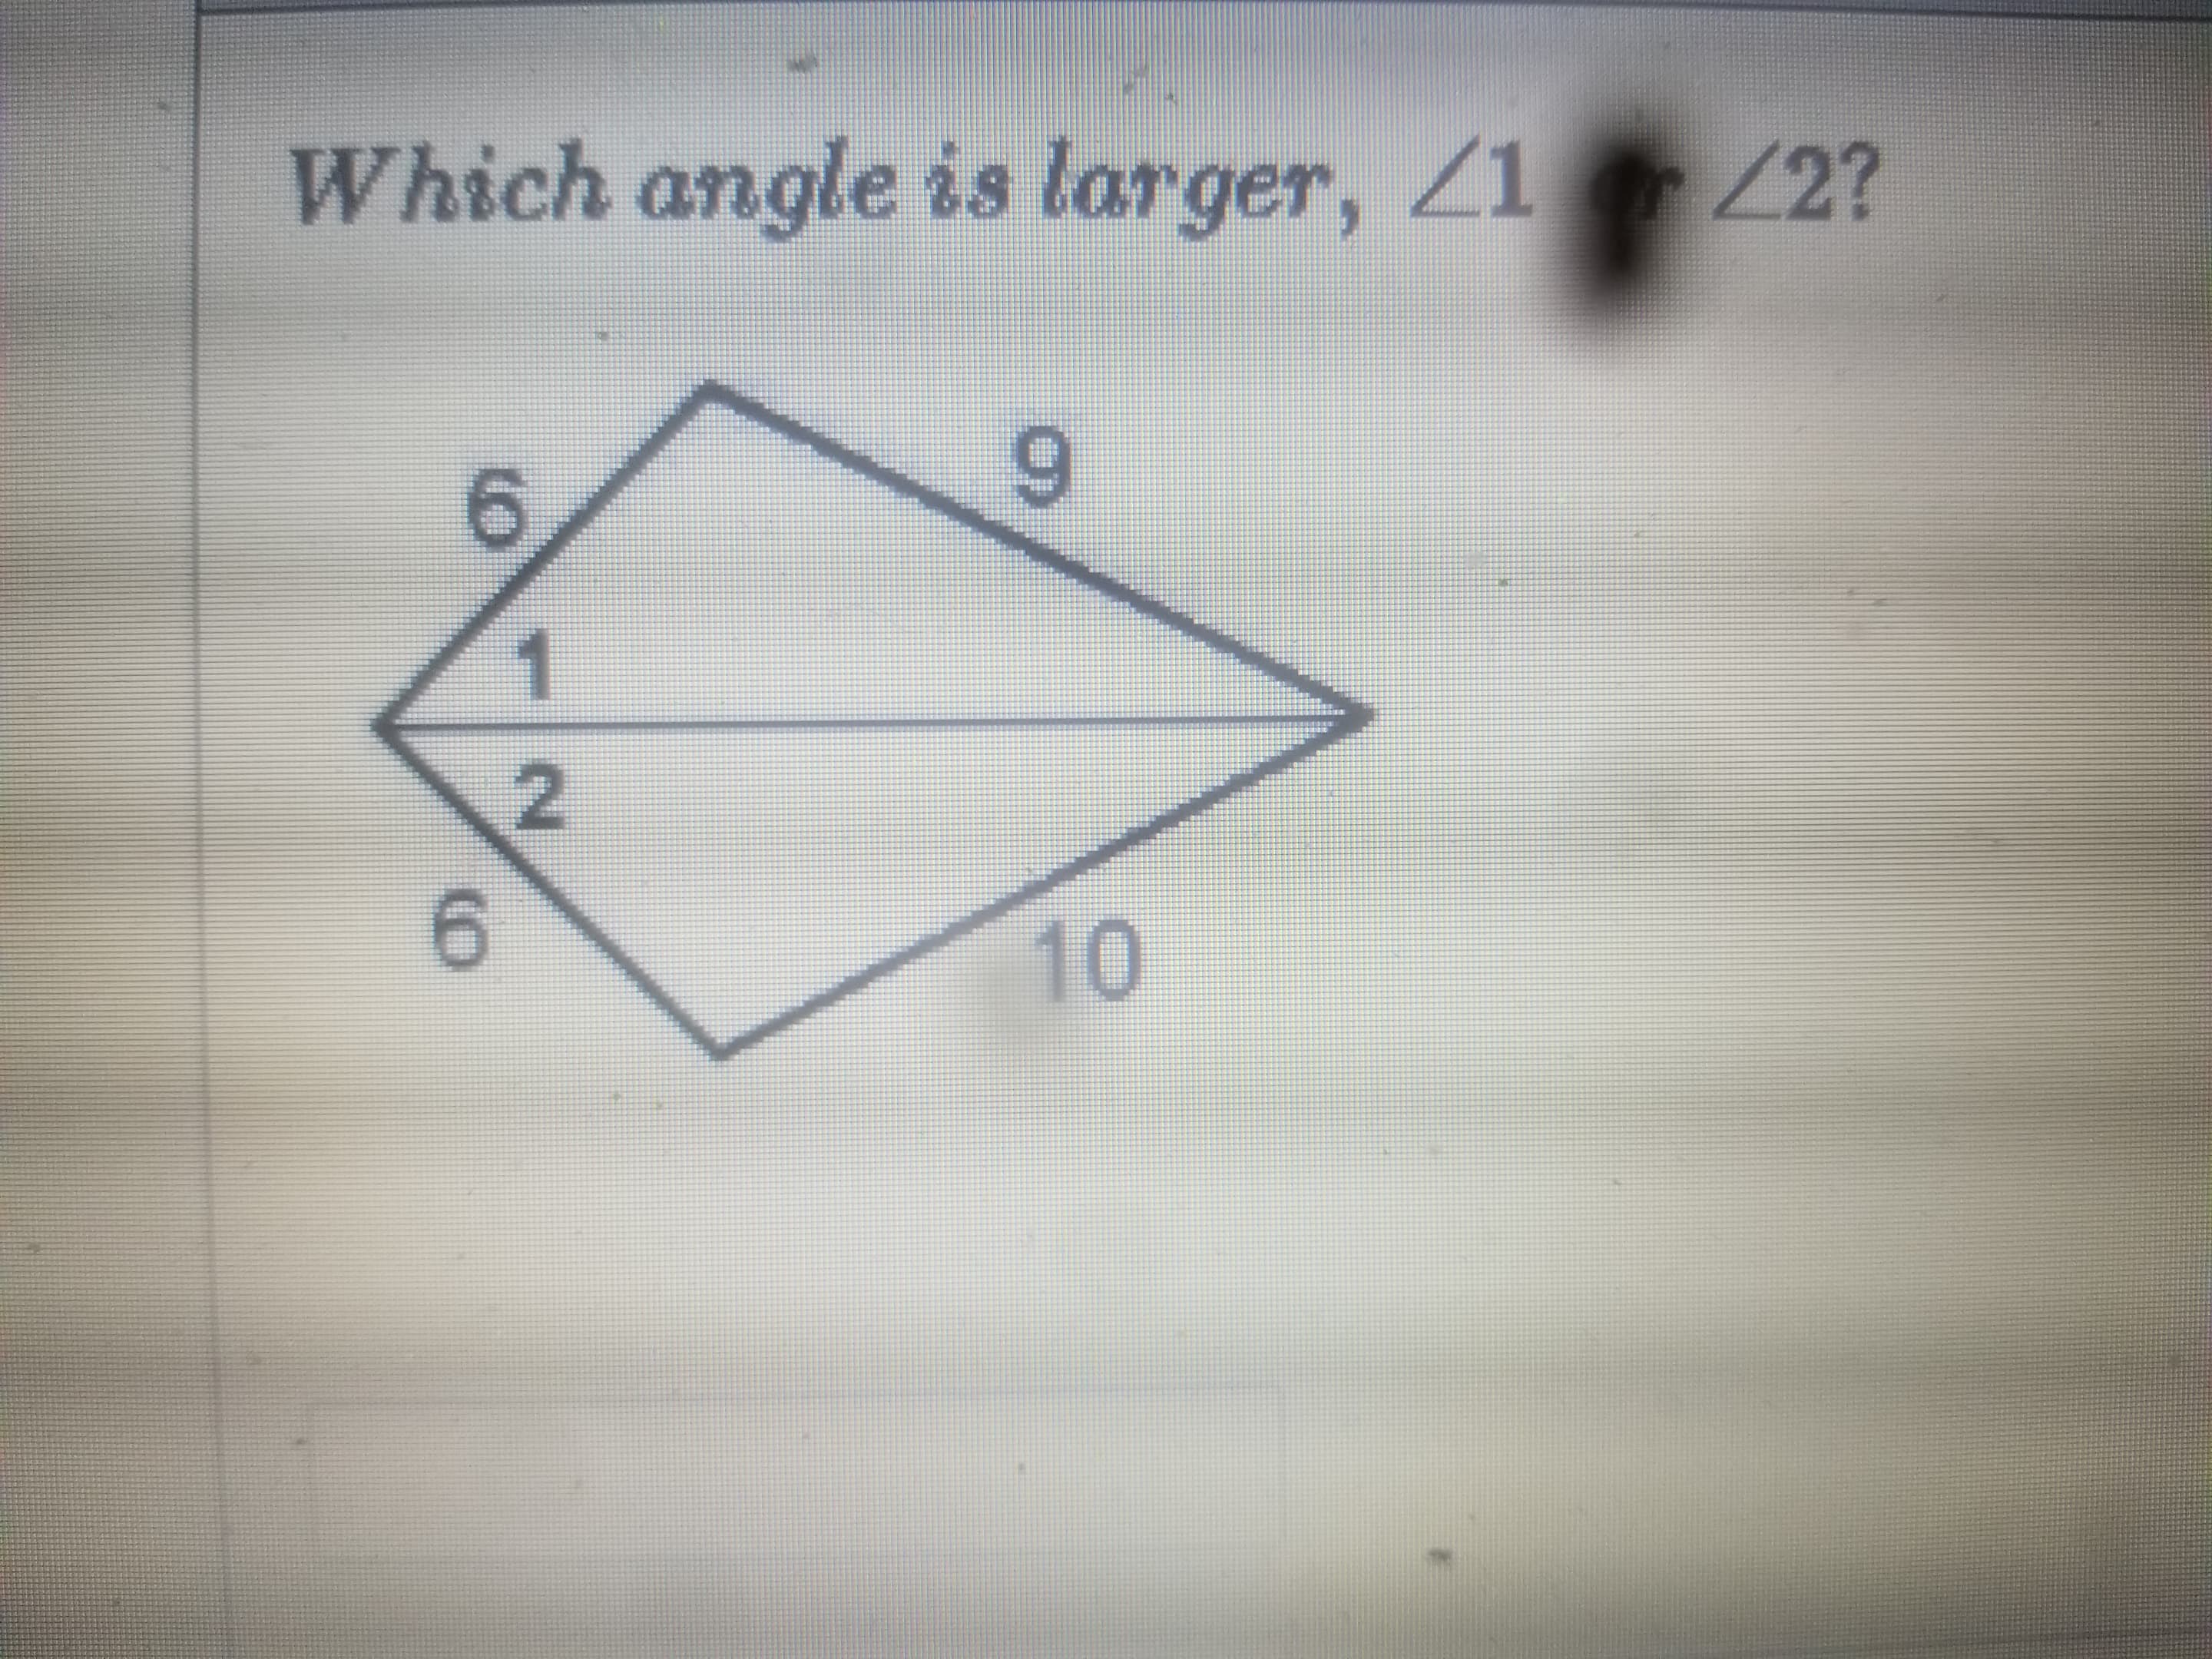 Which angle is larger, Z1 2?
